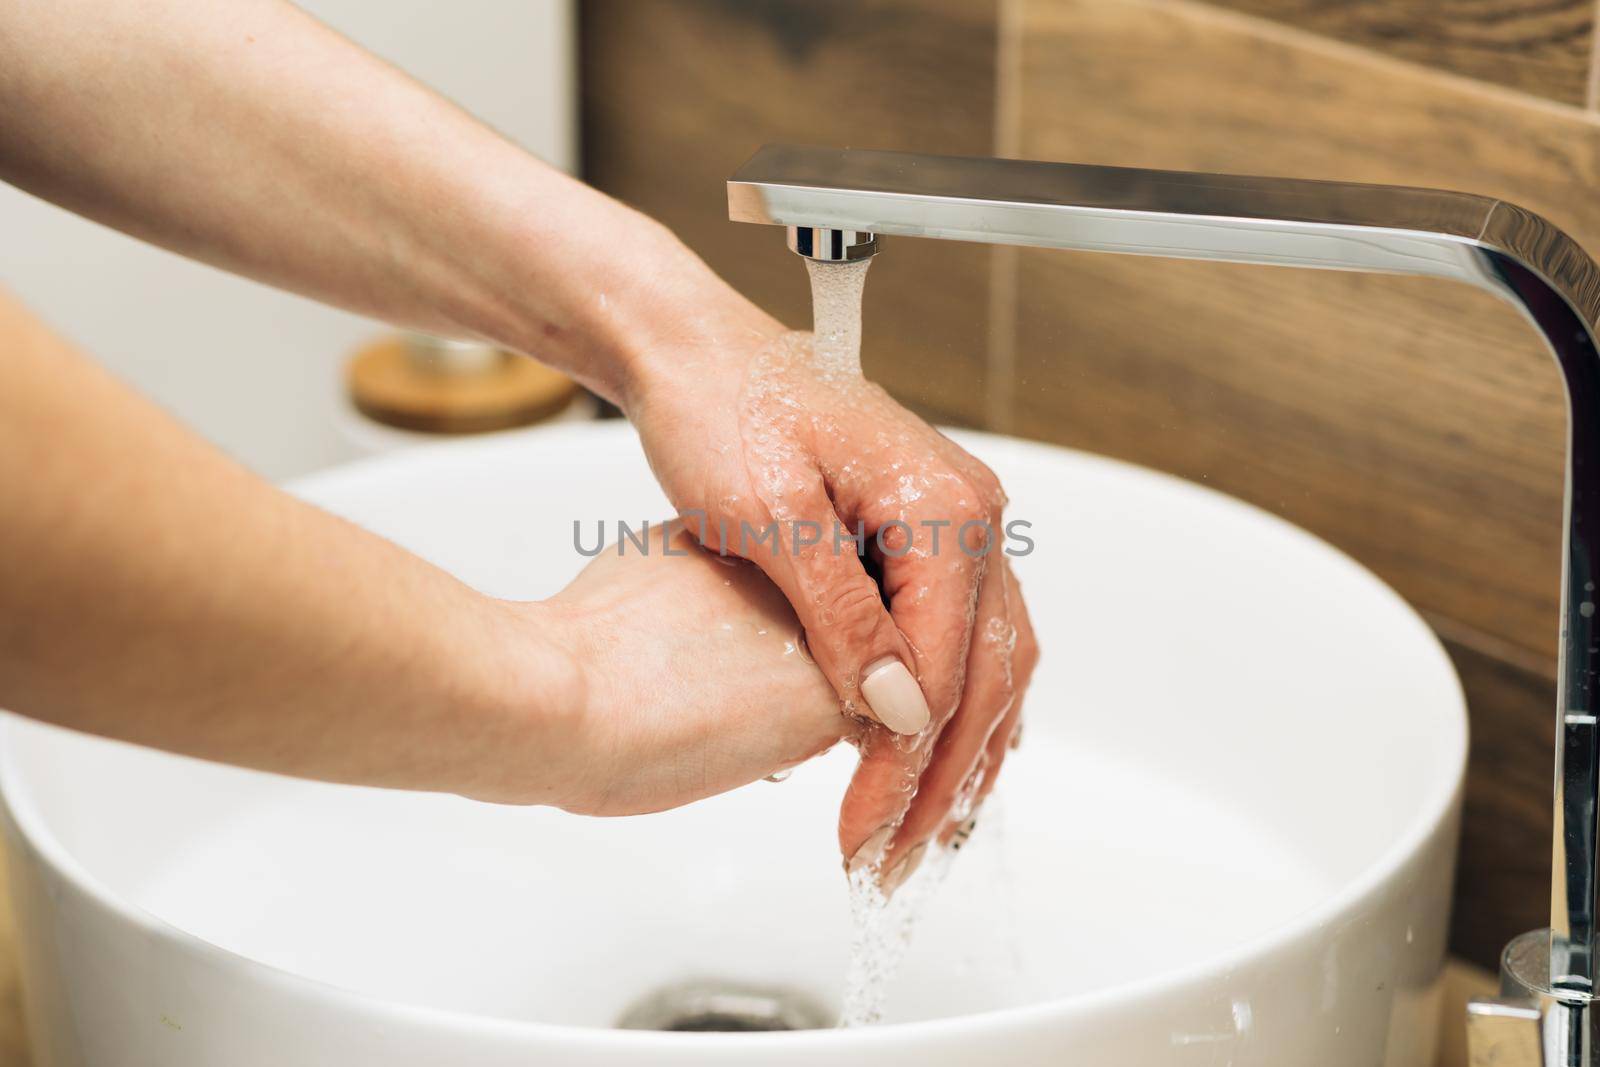 Concept of health, cleaning and preventing germs and coronavirus from contacting hands. Hands of woman wash their hands in a sink to wash the skin and water flows through the hands.